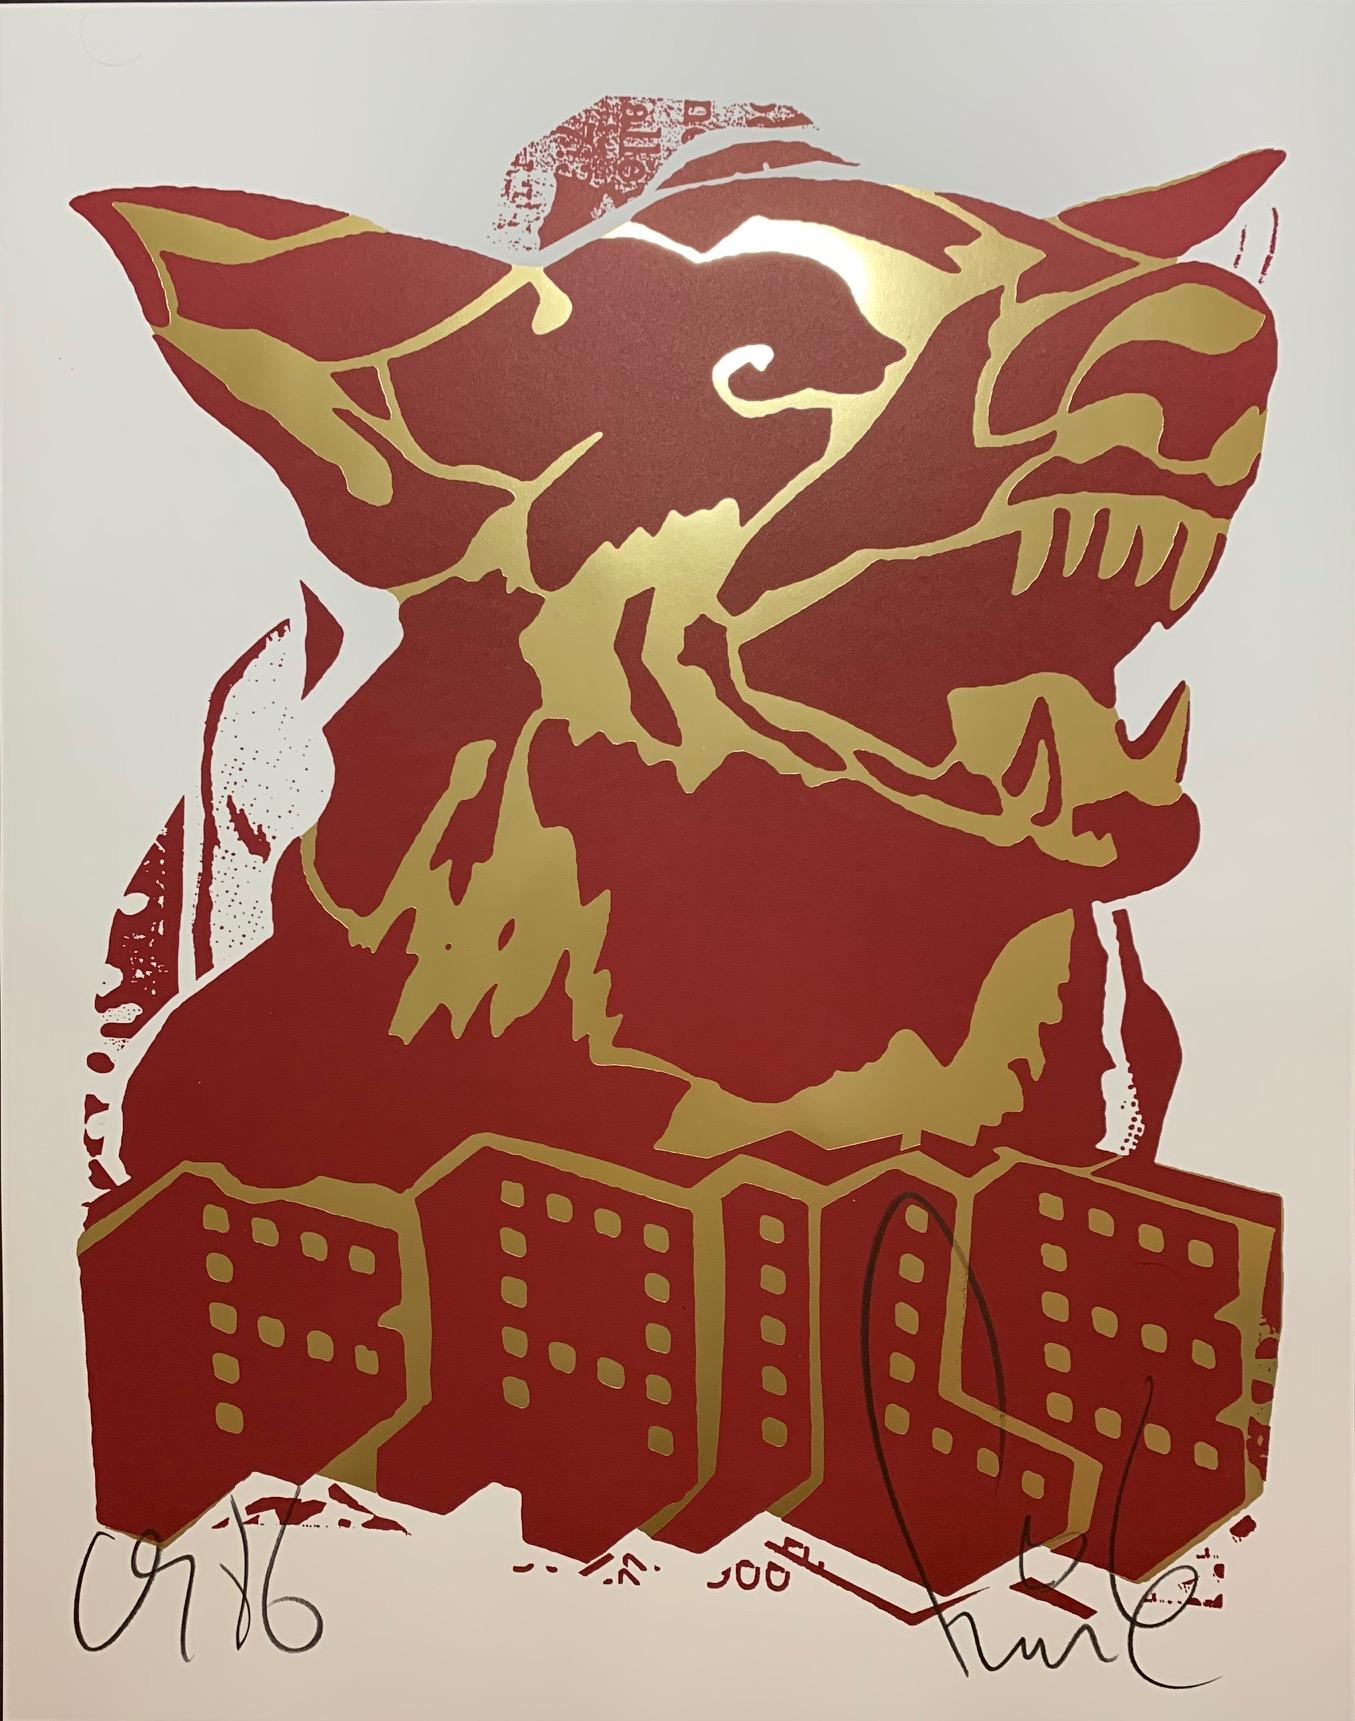 FAILE DOG 2018 Red And Gold Edition Gold Metallic Inks Pop Art Street Art Urban  - Brown Animal Print by Faile